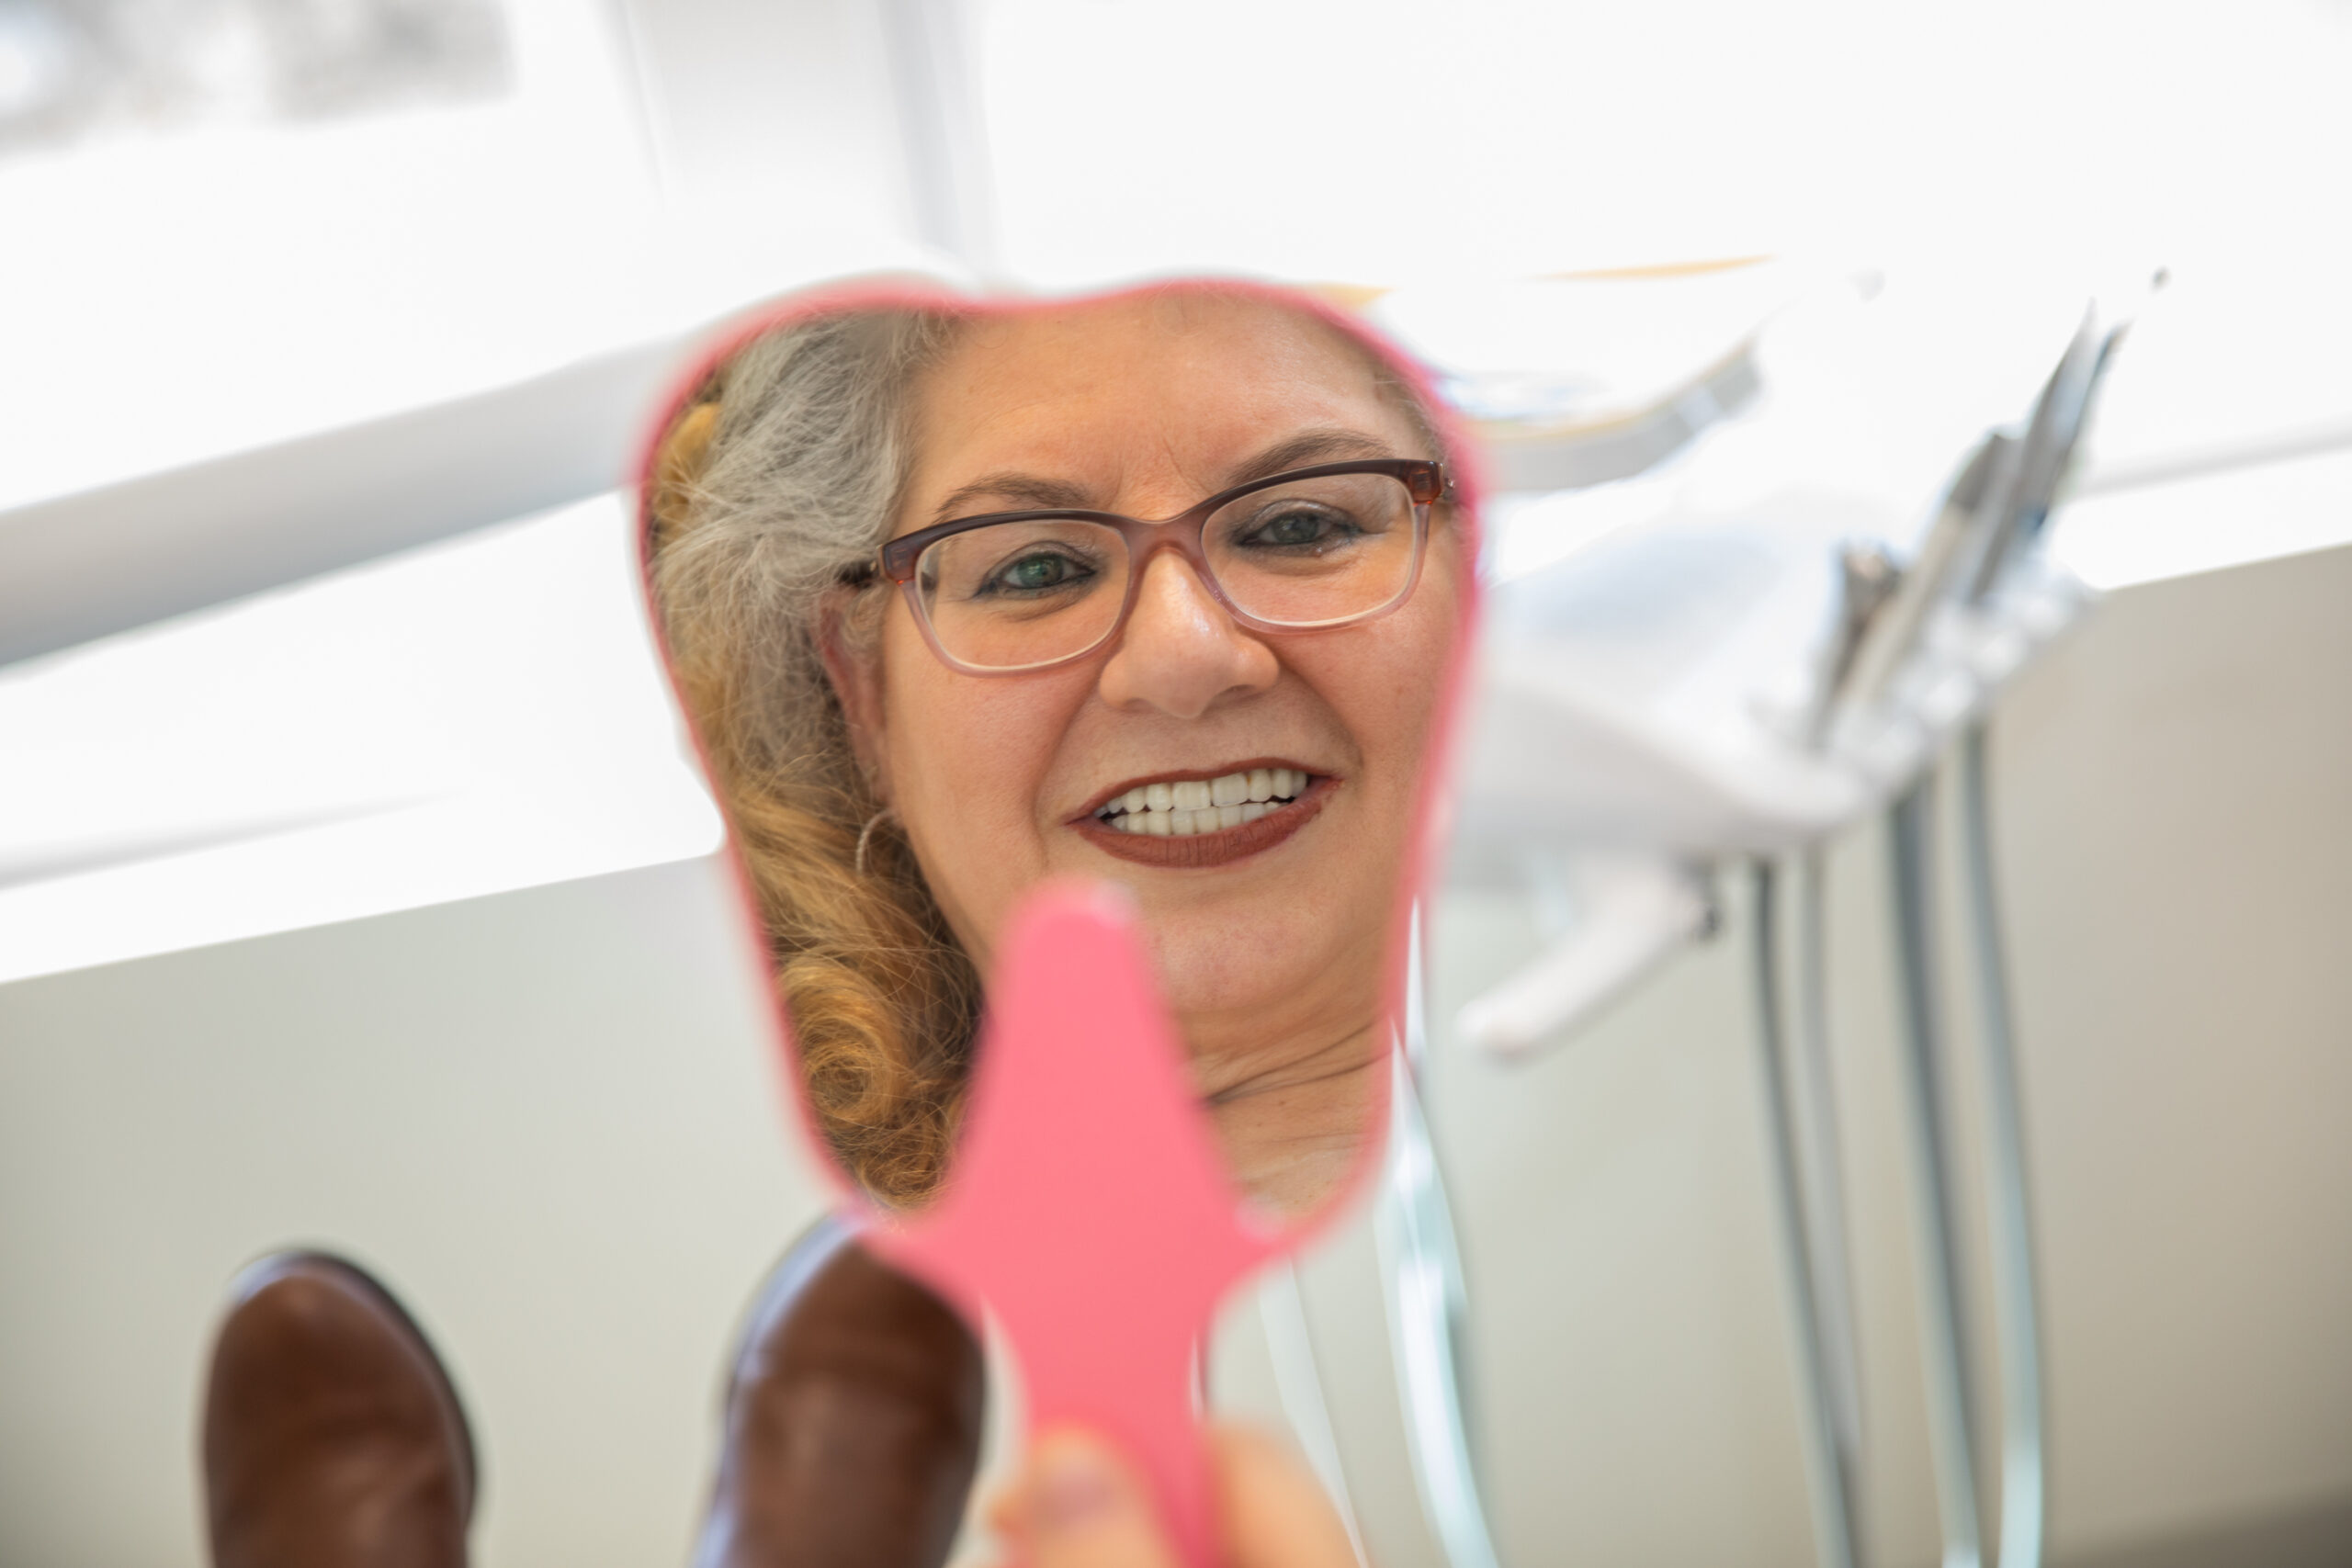 a patient smiling at her new teeth through a pink hand-held mirror after she has been treated with full mouth dental implants in Dr. Martirossian's office.